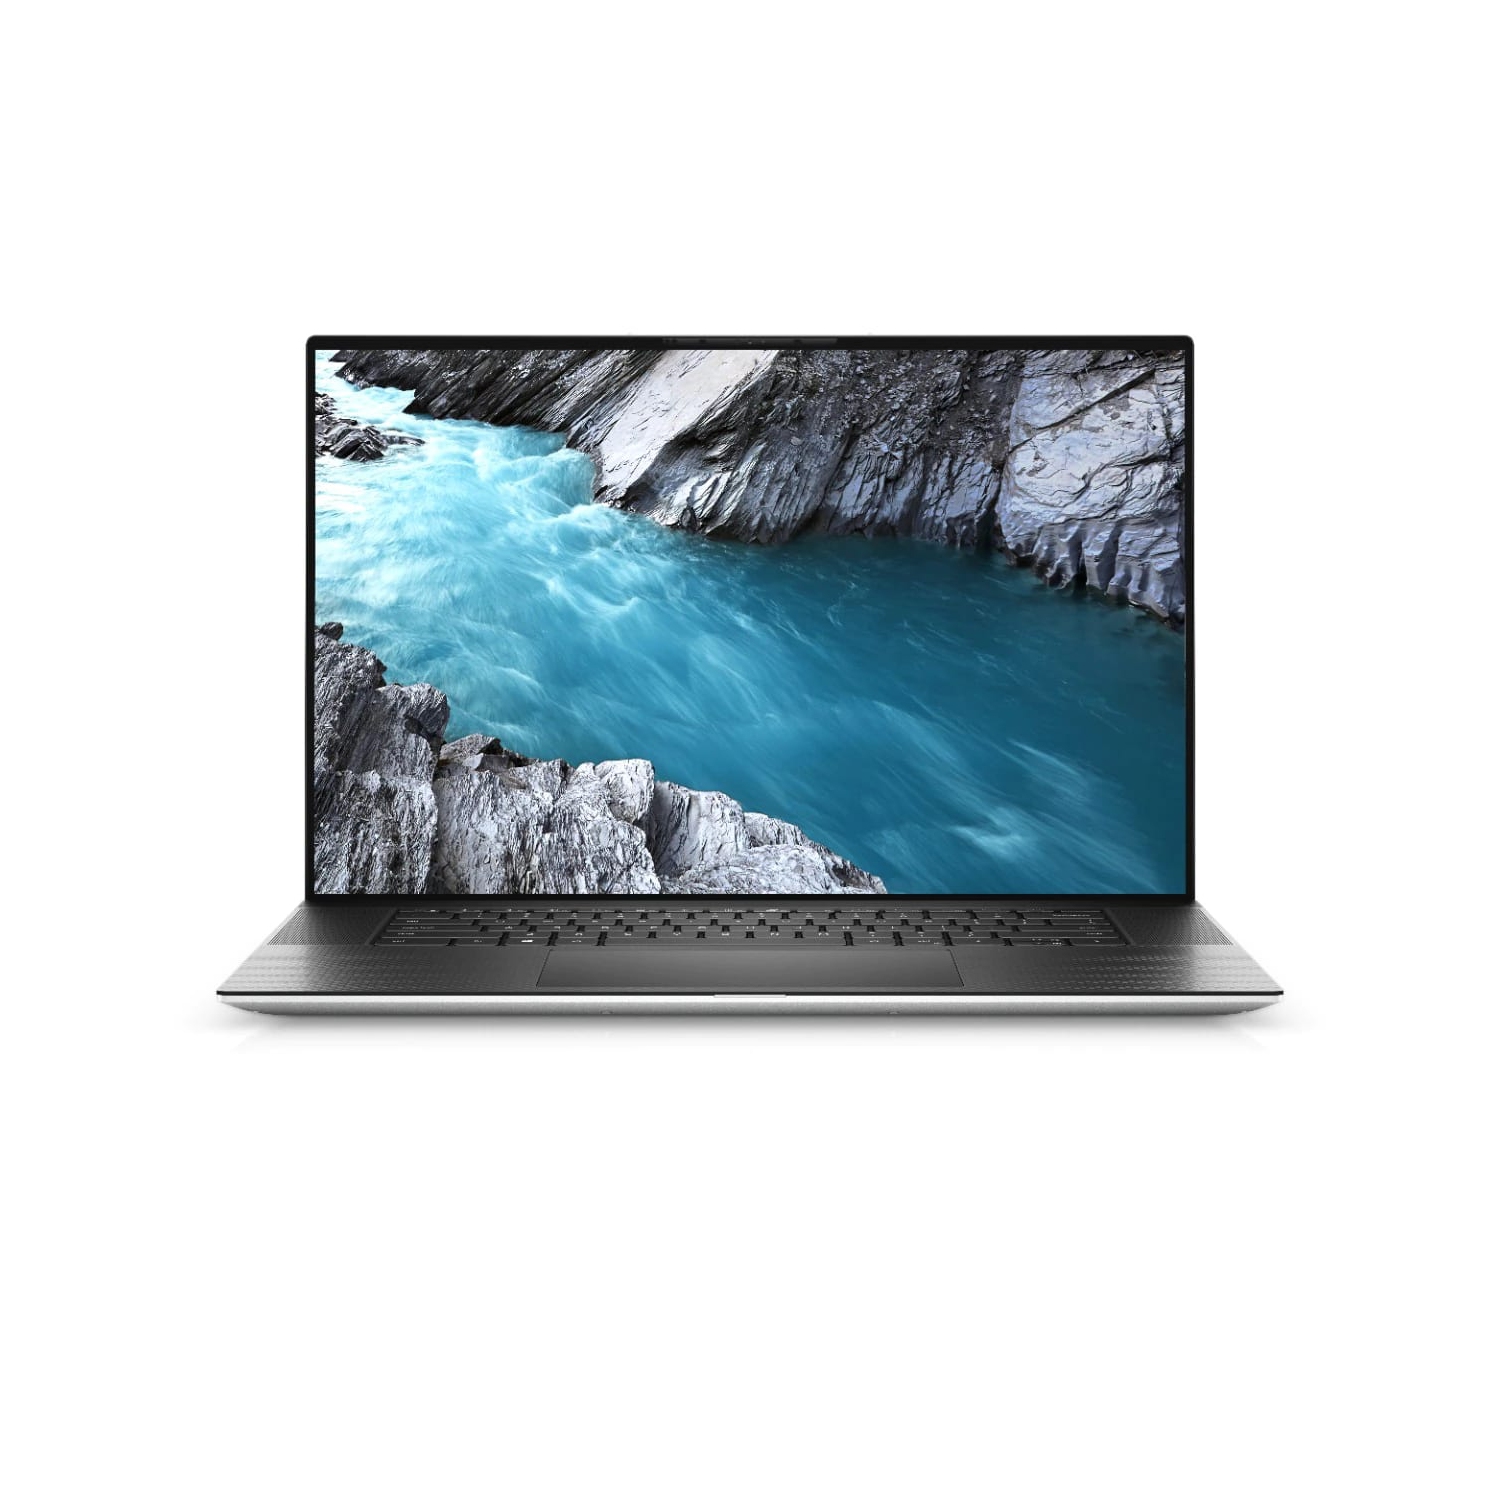 Refurbished (Excellent) - Dell XPS 17 9700 Laptop (2020) | 17" FHD+ | Core i9 - 2TB SSD - 32GB RAM - RTX 2060 | 8 Cores @ 5.3 GHz - 10th Gen CPU Certified Refurbished